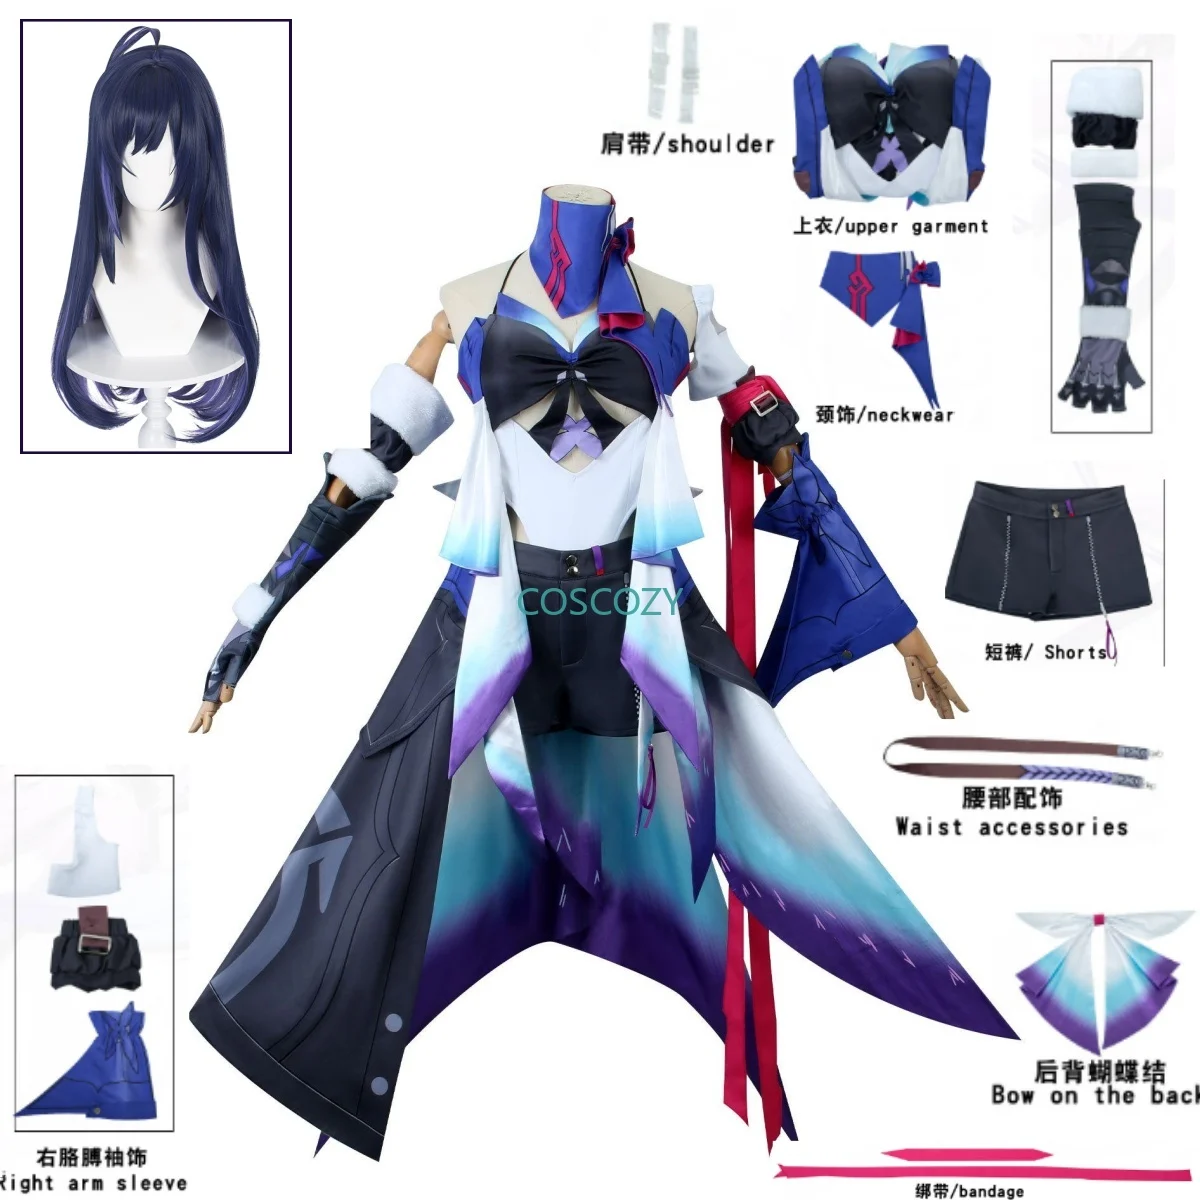 

Game Honkai Start Rail Seele Cosplay Costume Full Set With Accessories Convention Seele Cosplay Wig Outfit Uniform Dress